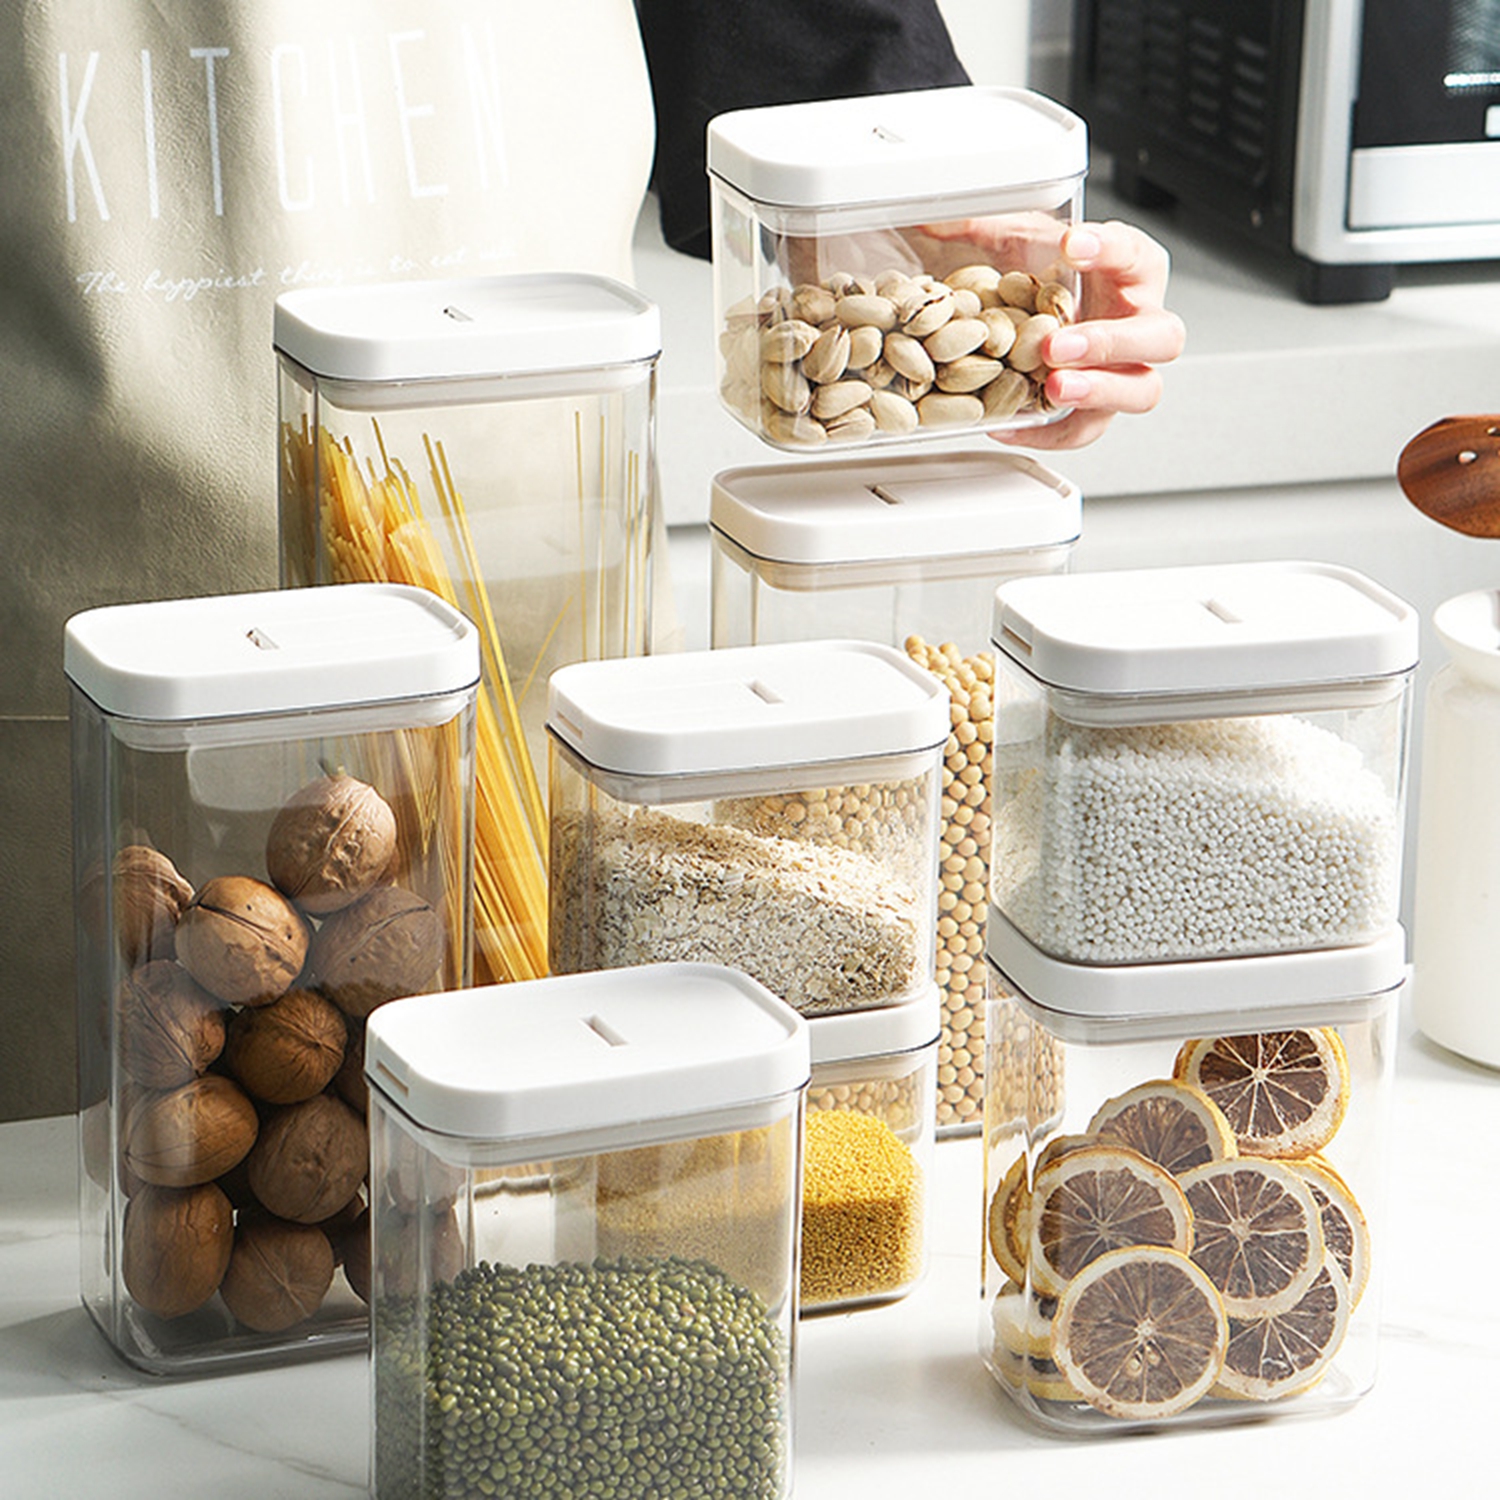 Airtight Food Containers With Easy Lock Lids, Bpa Free Plastic